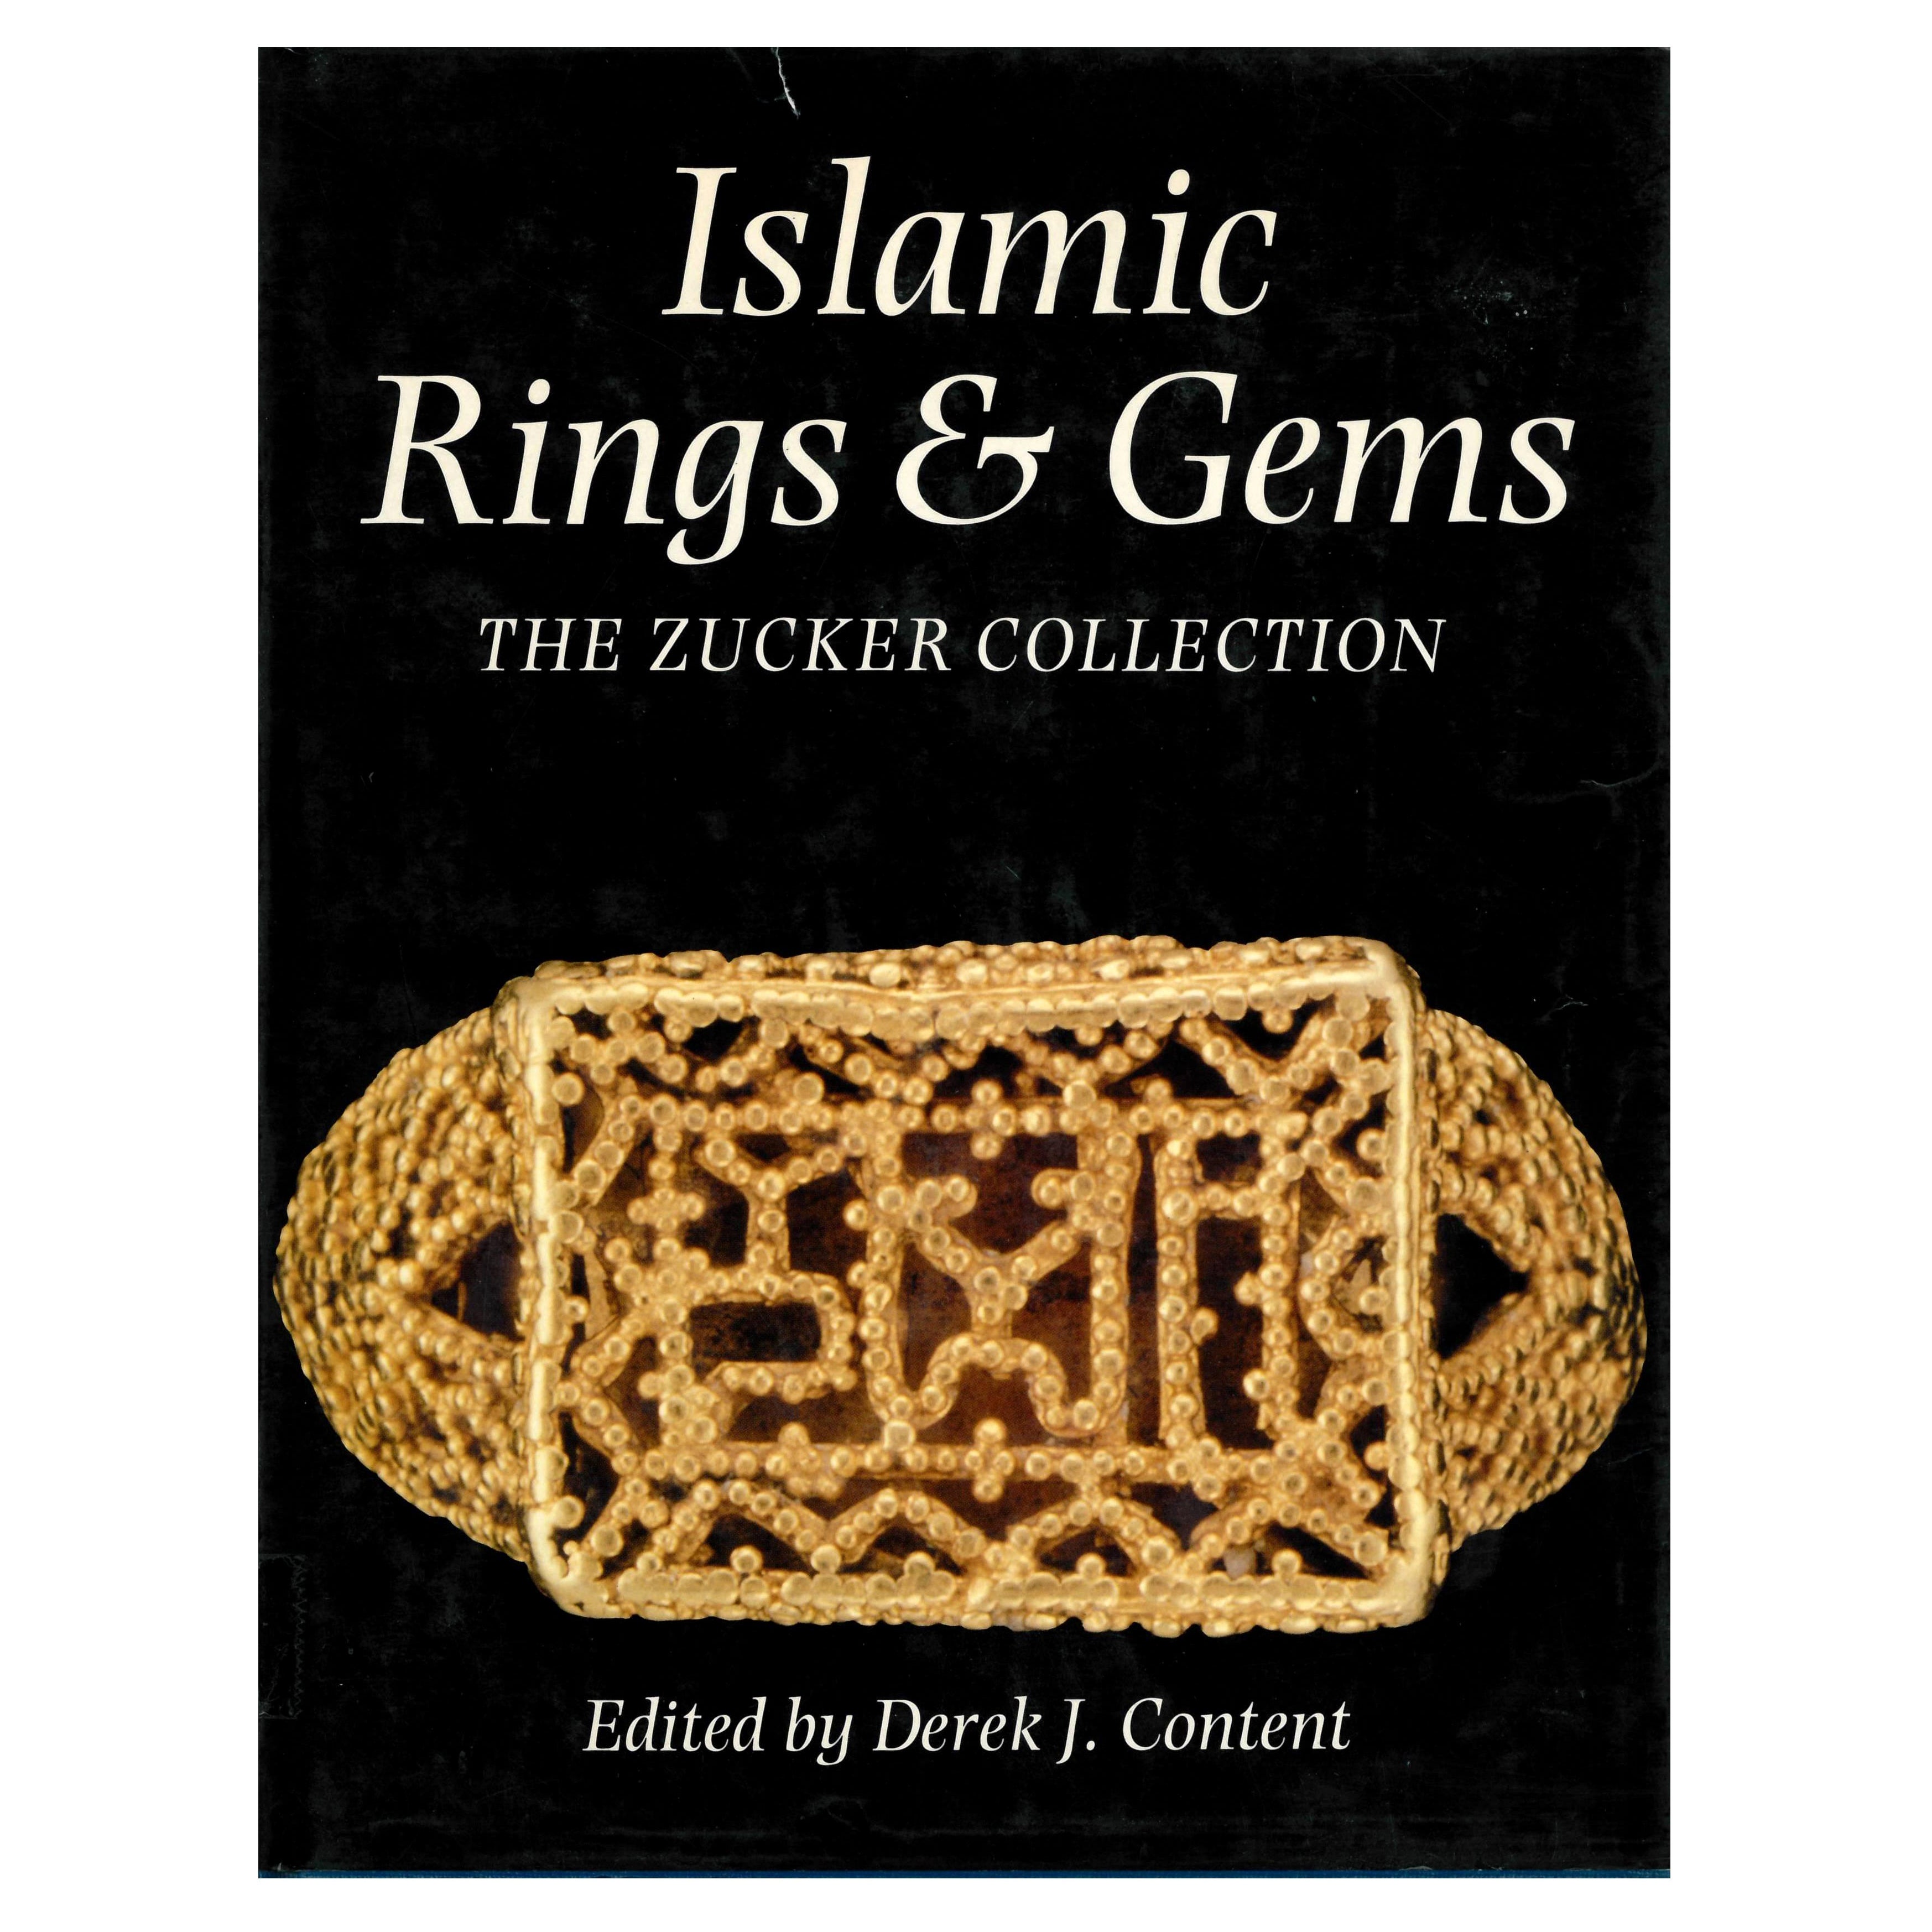 Islamic Rings & Gems: The Zucker Collection Edited by Derek J. Content (Book) For Sale